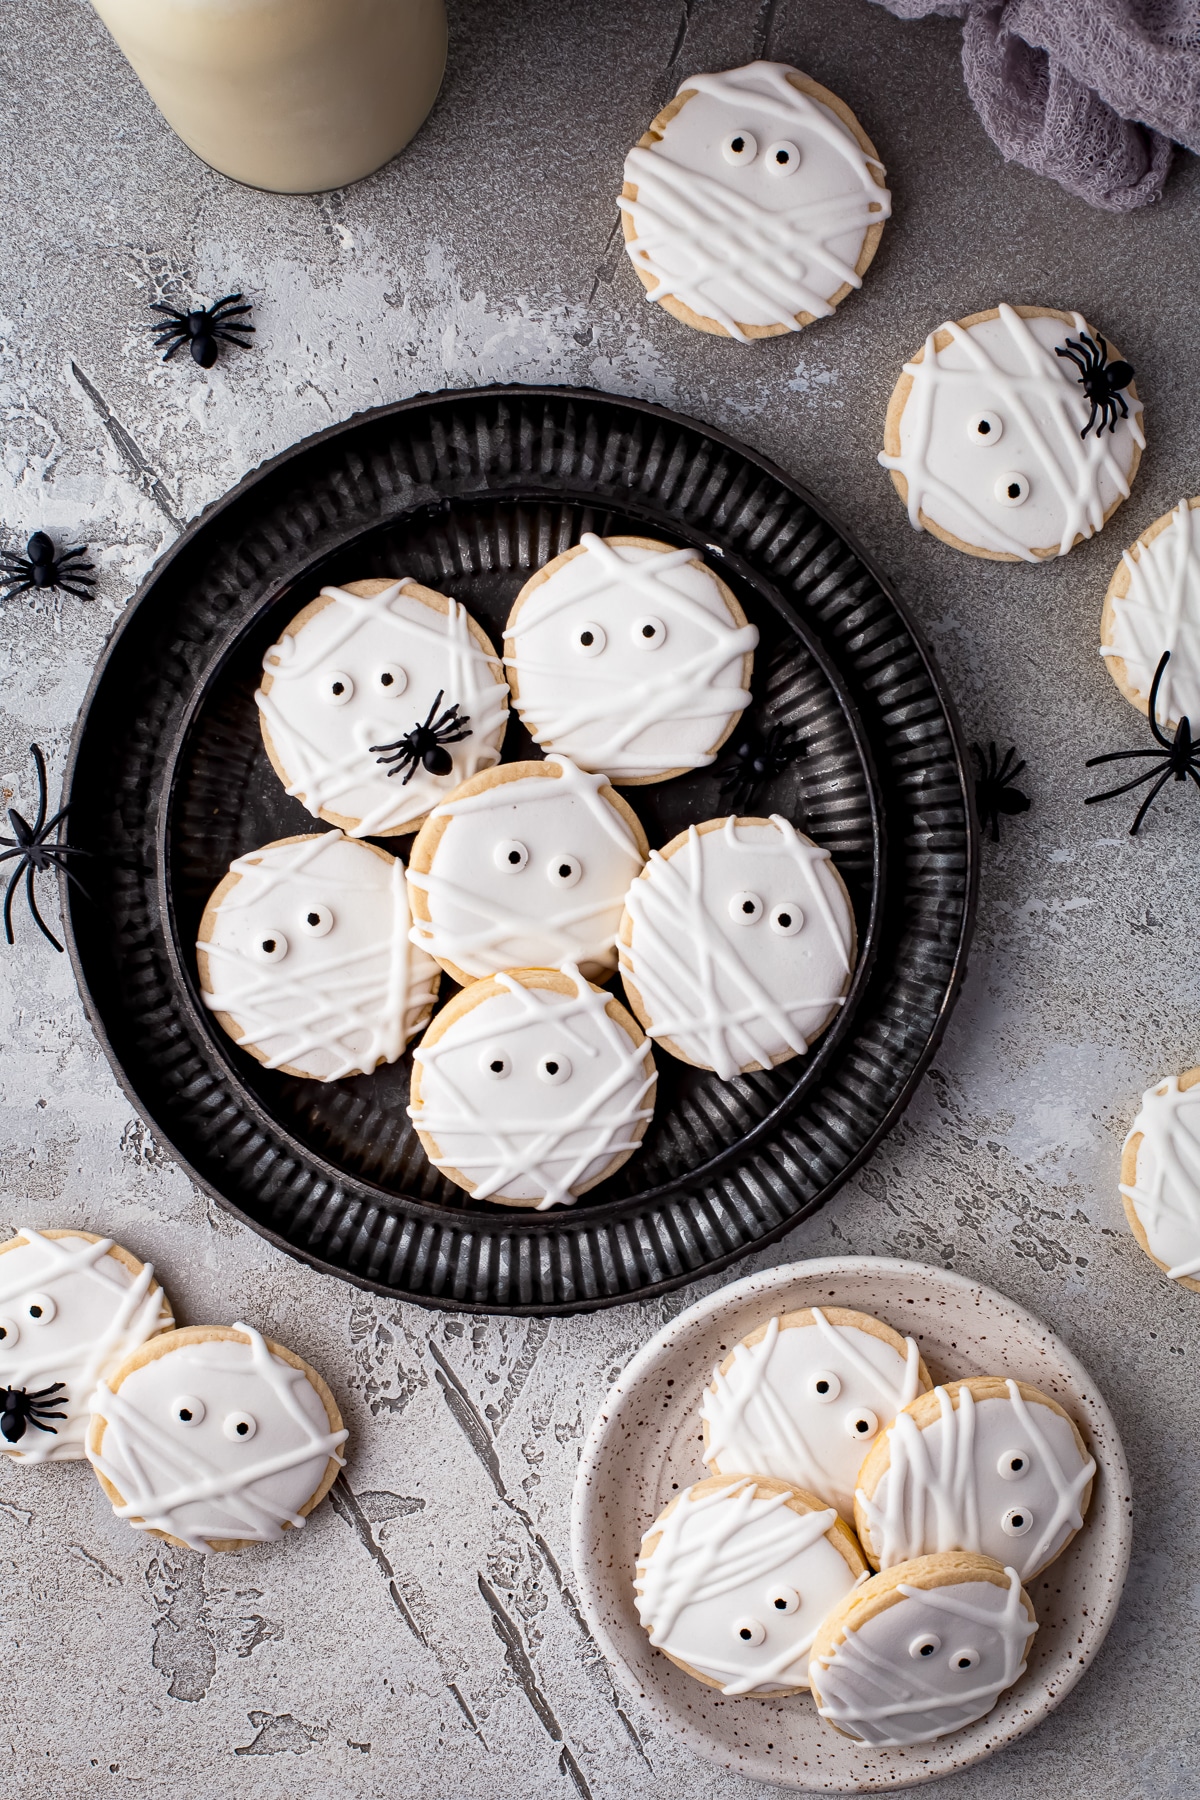 Cookies on black and white plates overhead.